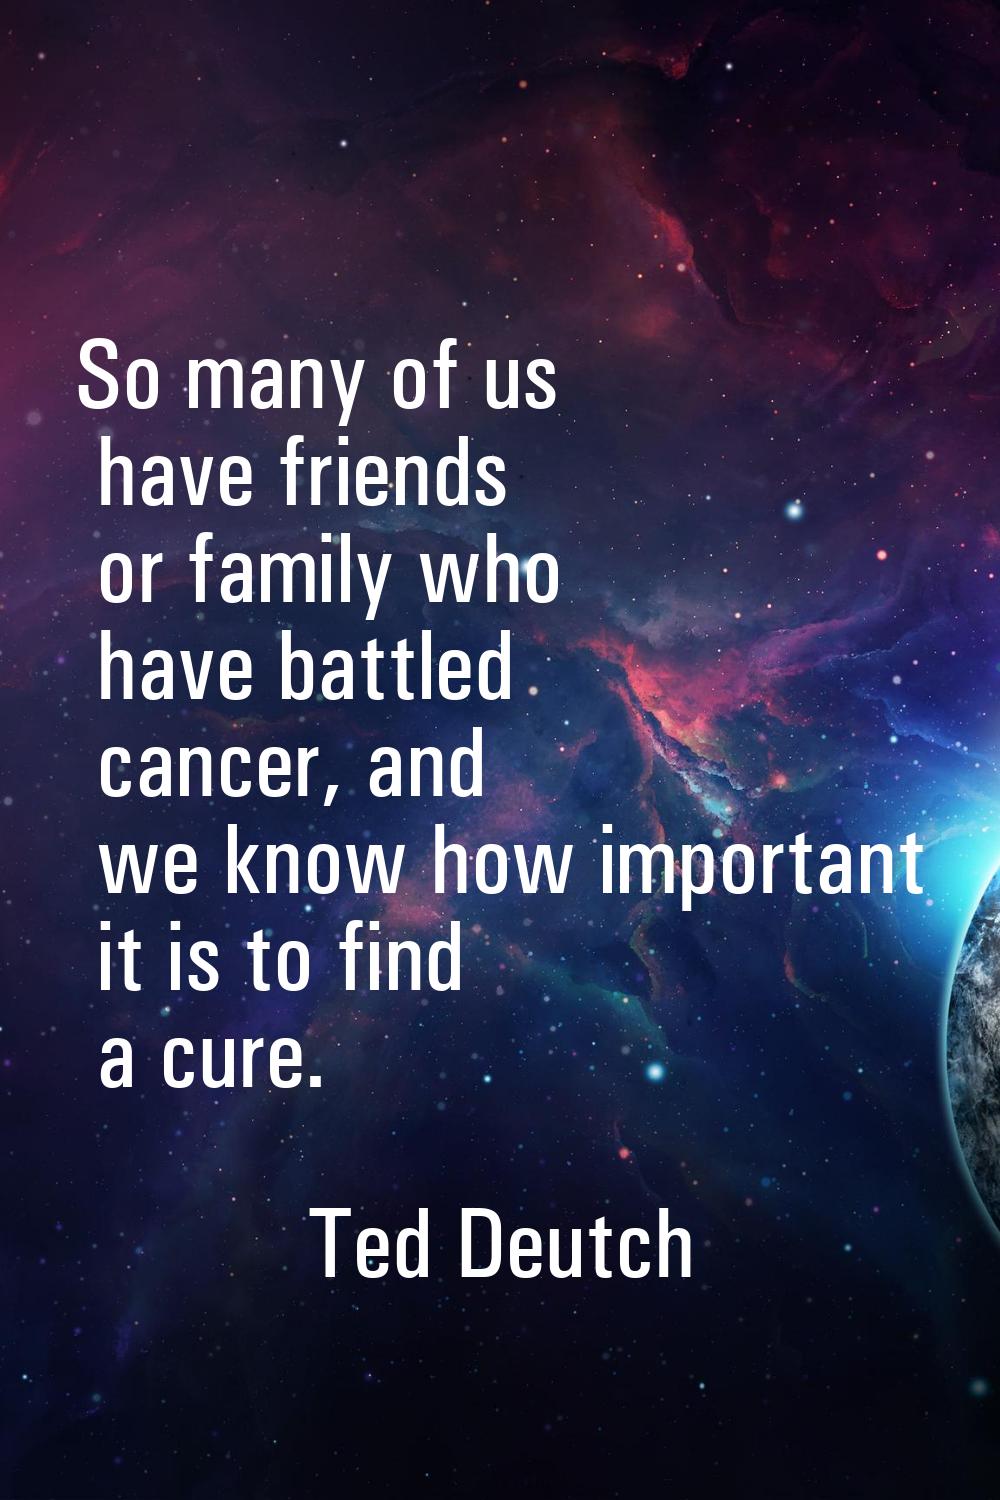 So many of us have friends or family who have battled cancer, and we know how important it is to fi